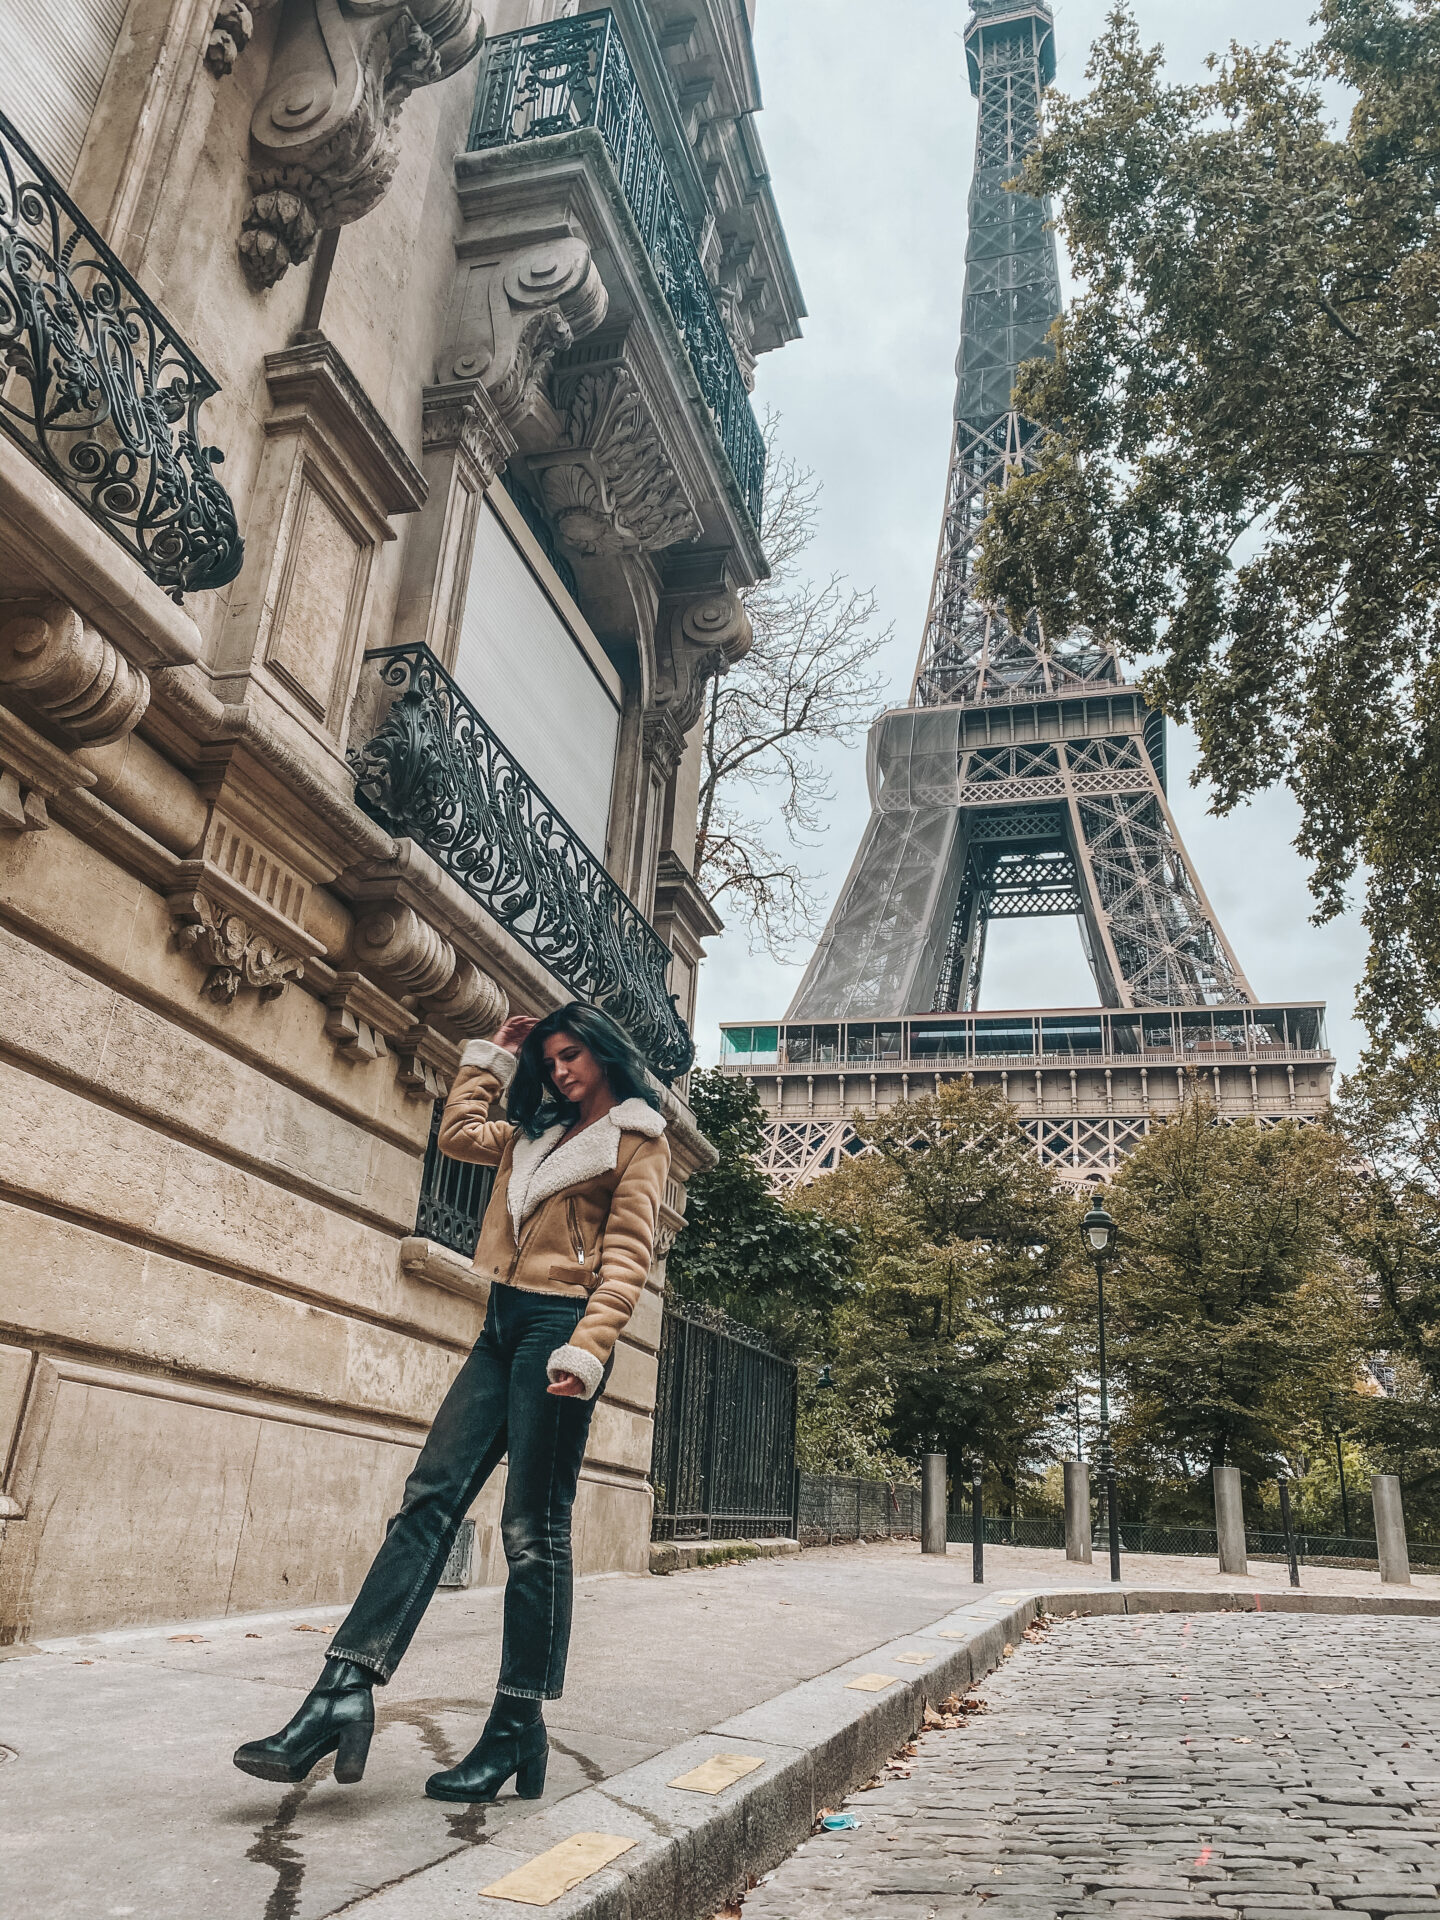 Couple's Photoshoot at the Eiffel Tower - with a private picnic!